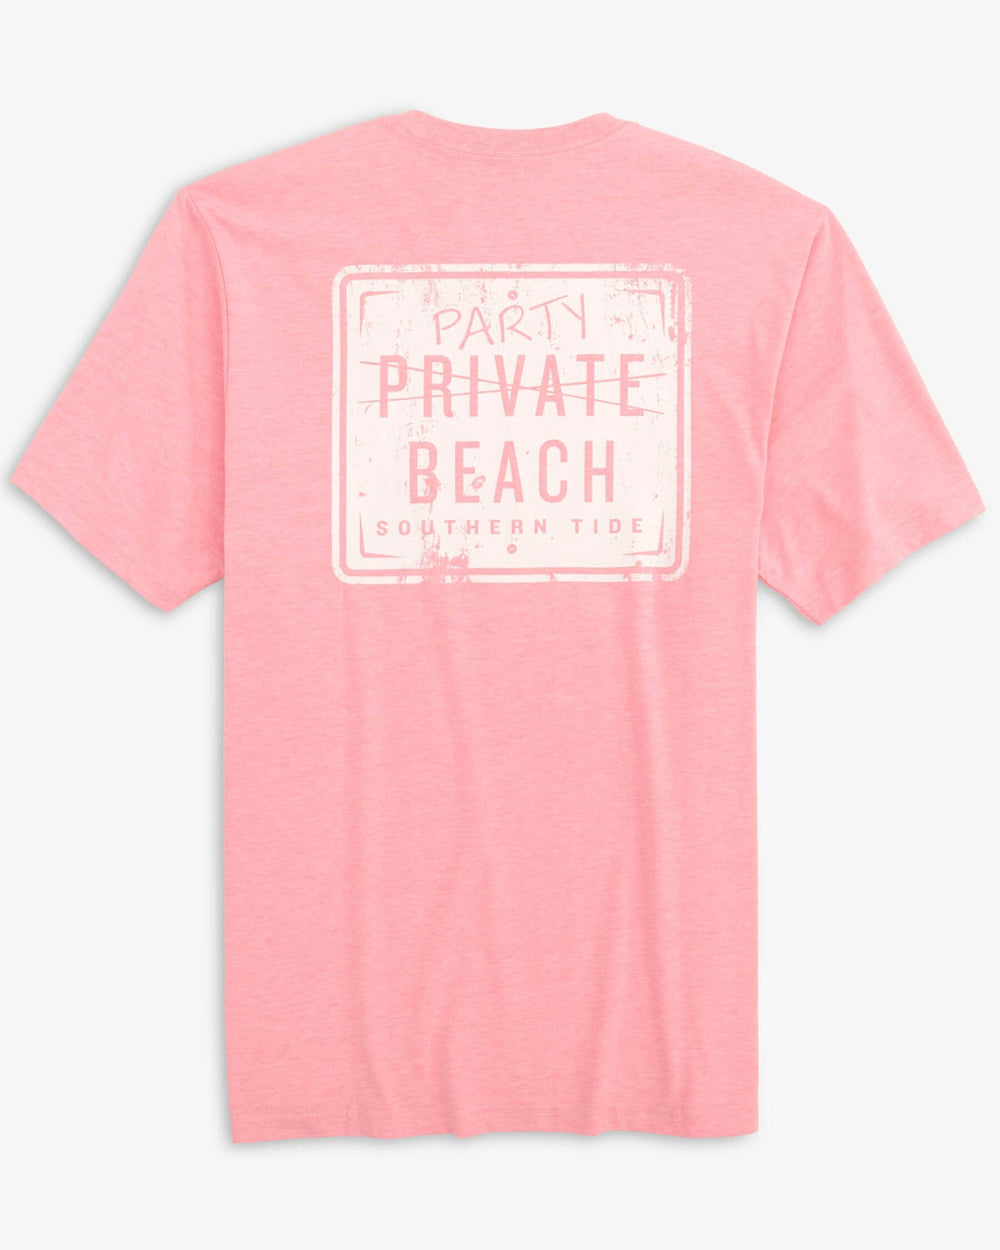 The back view of the Southern Tide Heather Party Beach Sign T-Shirt by Southern Tide - Heather Flamingo Pink